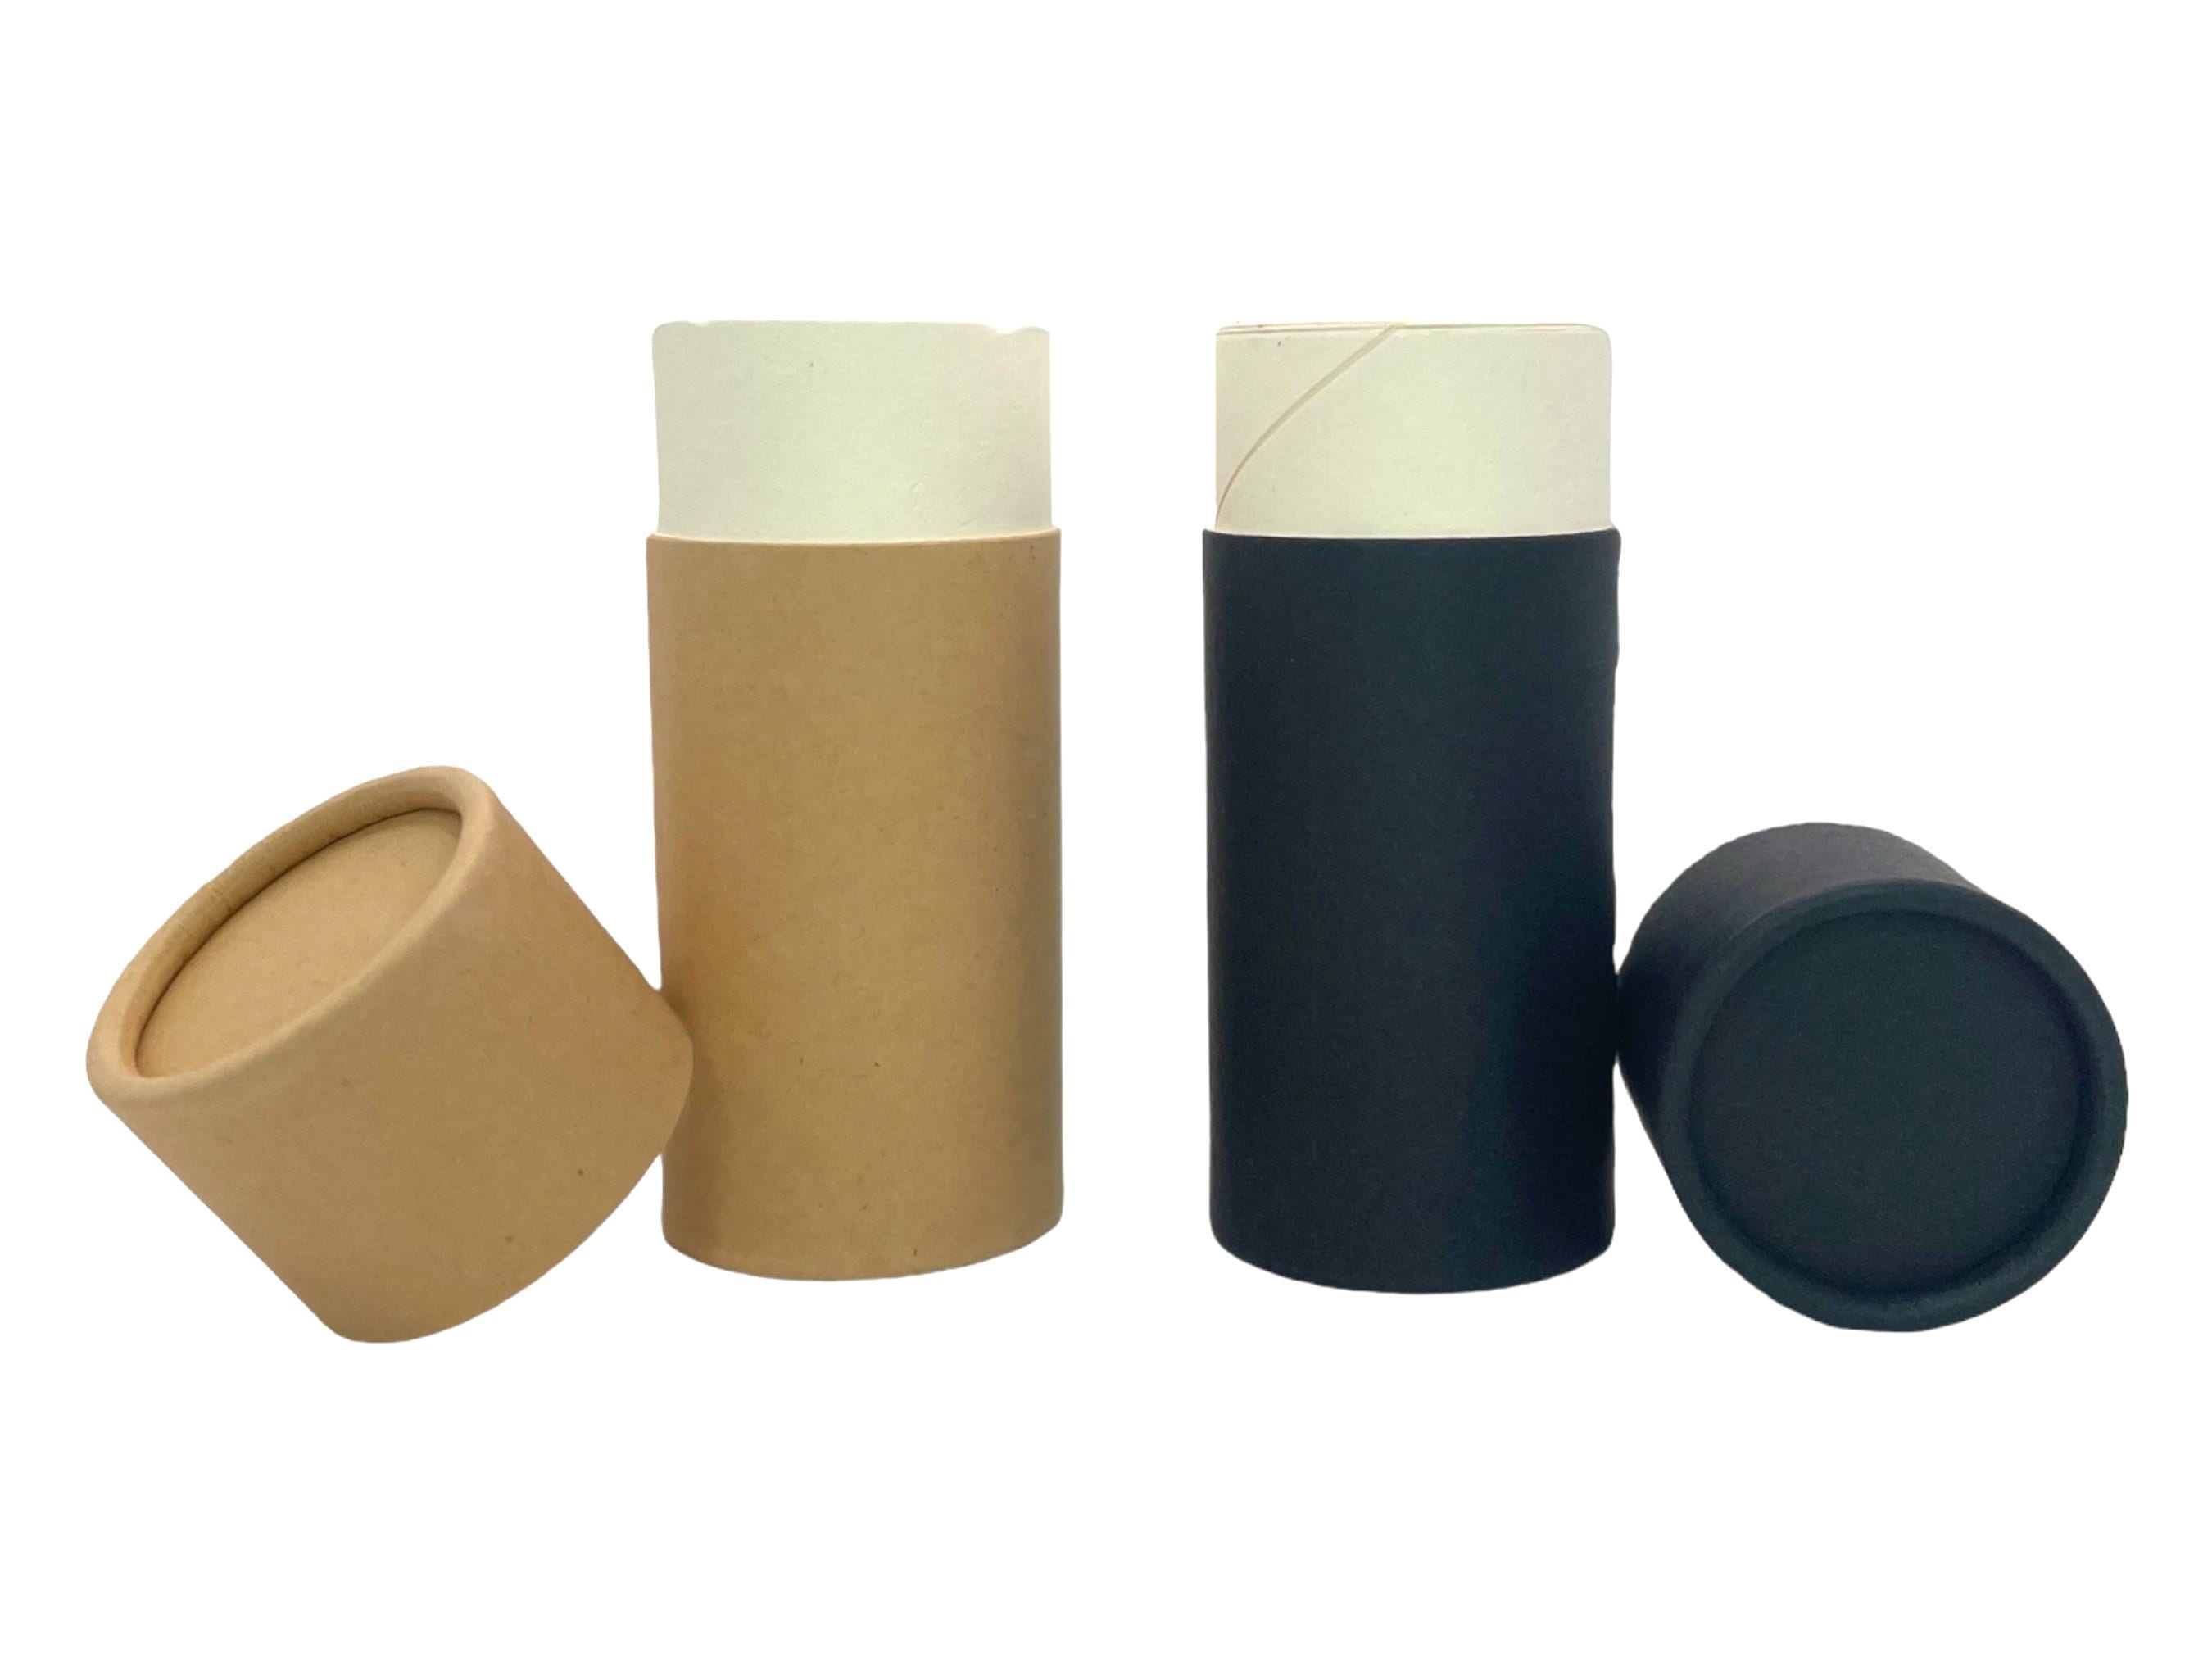 Poster Tube Postal Tube Storage Cardboard Mailing Tube with Caps Packing Tubes for Artwork Blueprint Document Shipping Storage Container 50cm, Men's